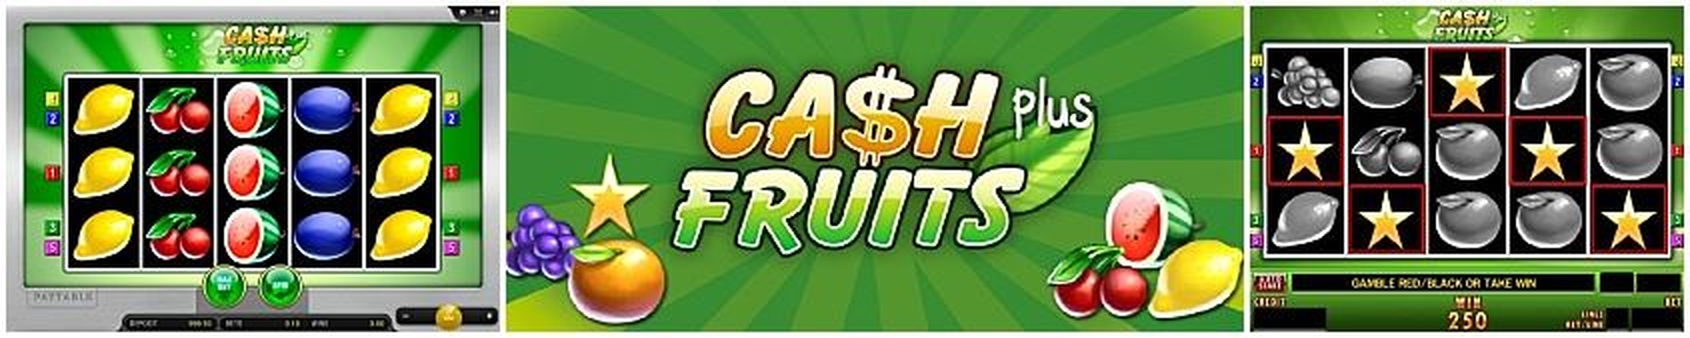 The Cash Fruits Online Slot Demo Game by Merkur Gaming